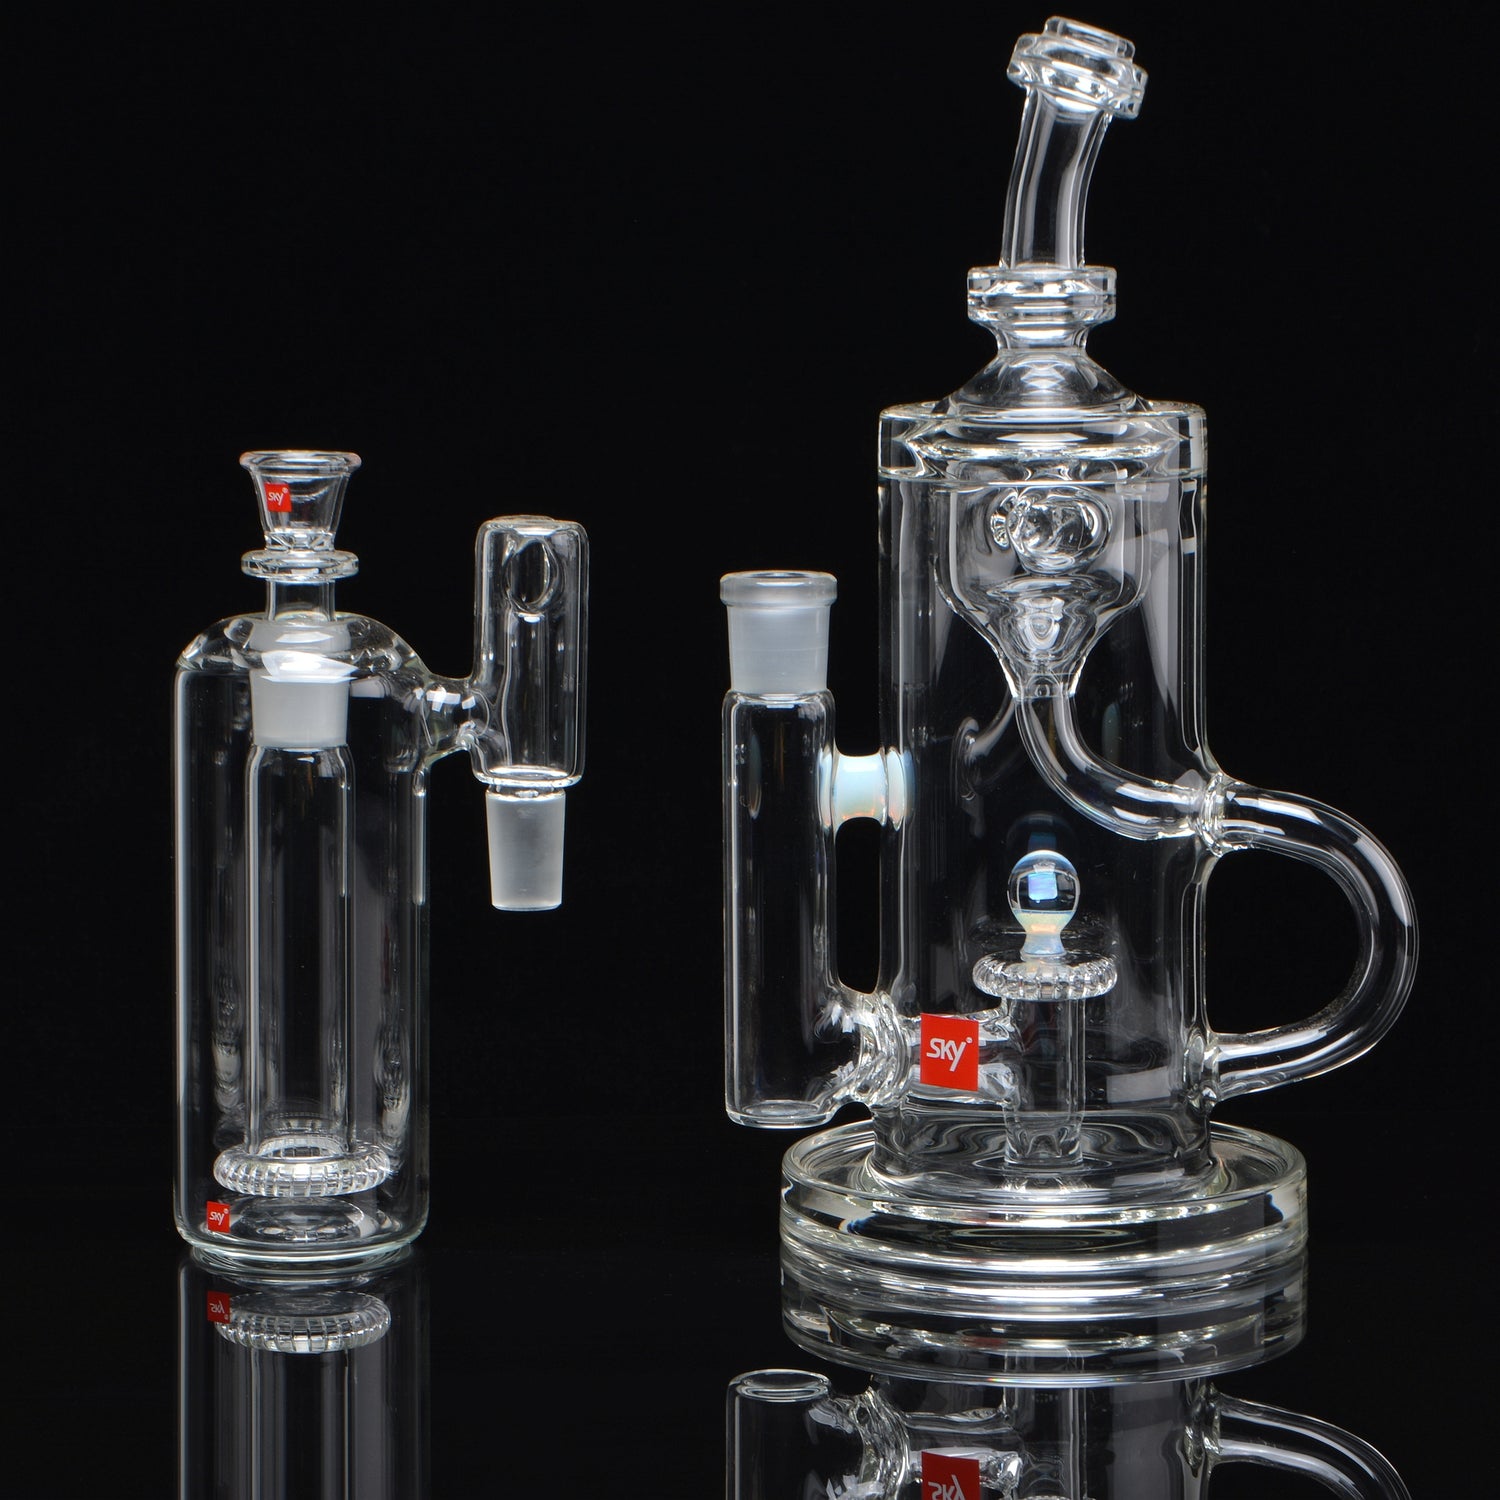 Recycler and splashcatcher seperated, standing upright